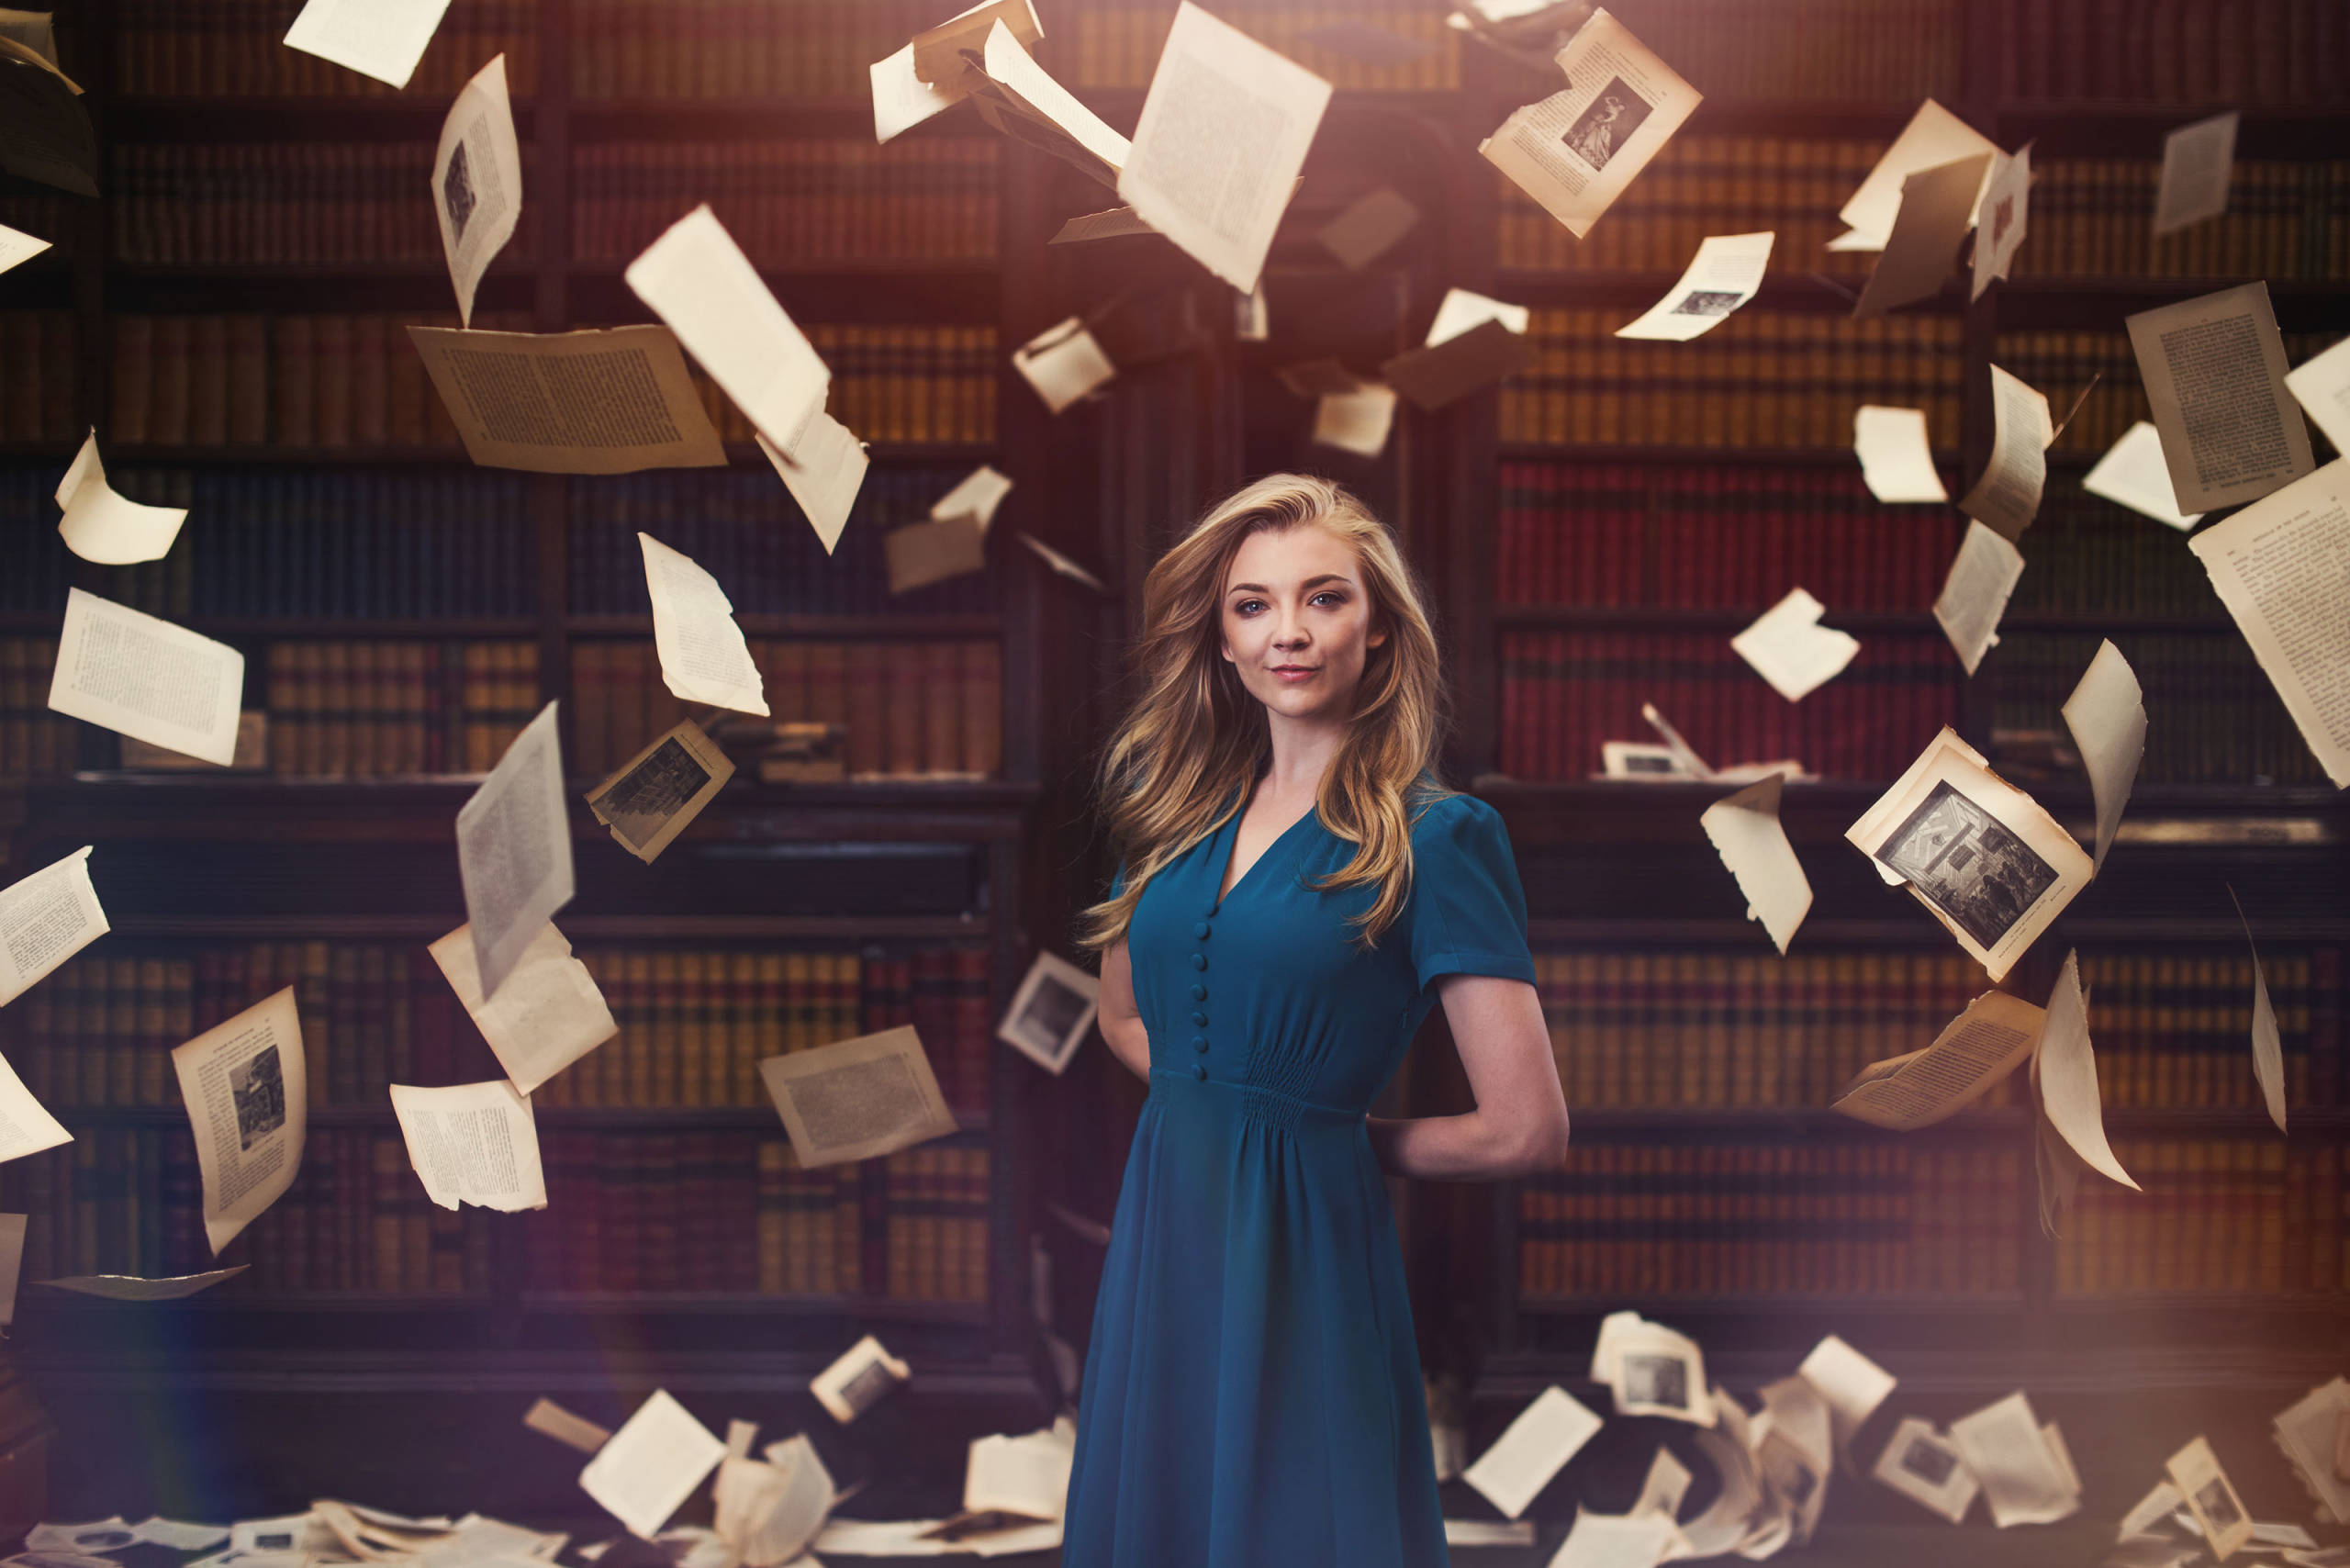 History of Magic book pages surrounding Natalie Dormer still image